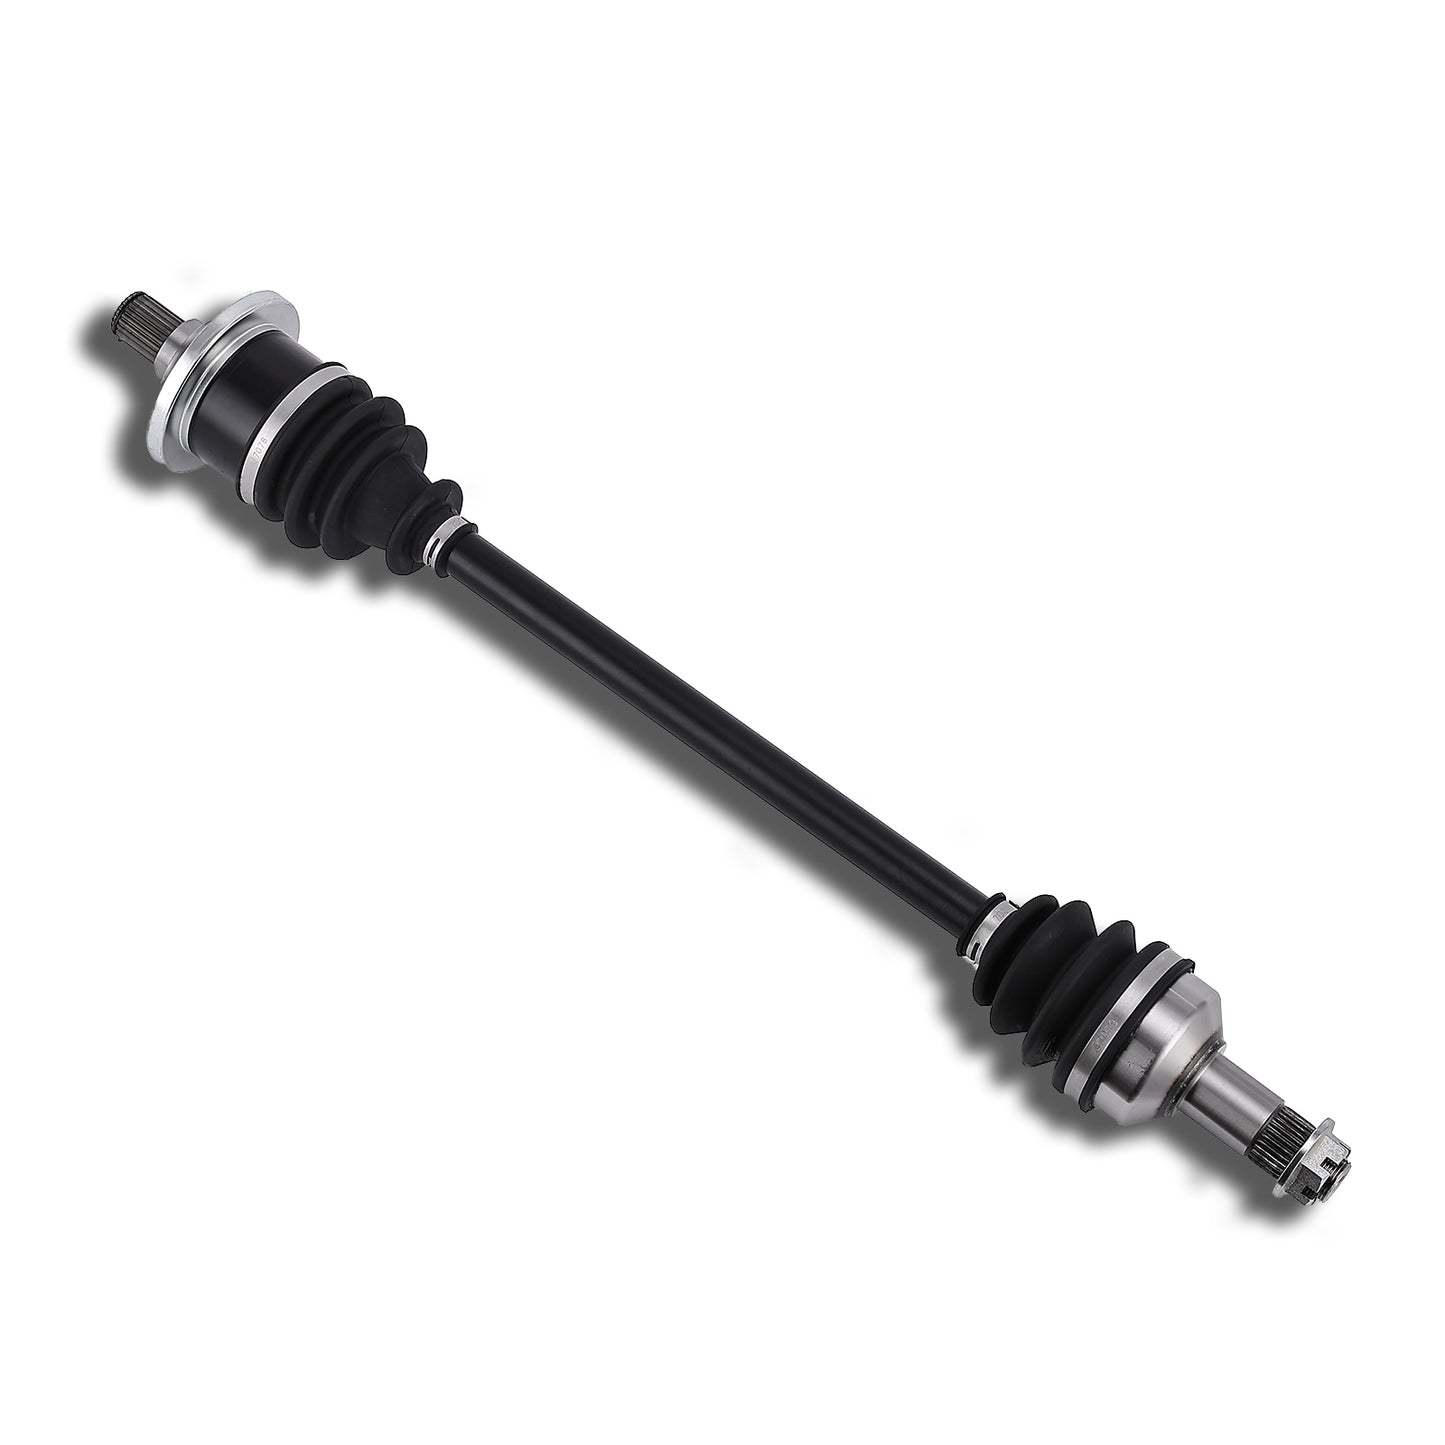 1 CAM-AC147 and 1 CAM-AC247 Front Left Drive Shaft CV Axle for ARCTIC CAT (2014) 500 Prowler LF / (2009-2015) 550 Prowler LF / (2008-2014) 700 Prowler LF & BR / (2009-2014) XTZ 1000 Prowler LF